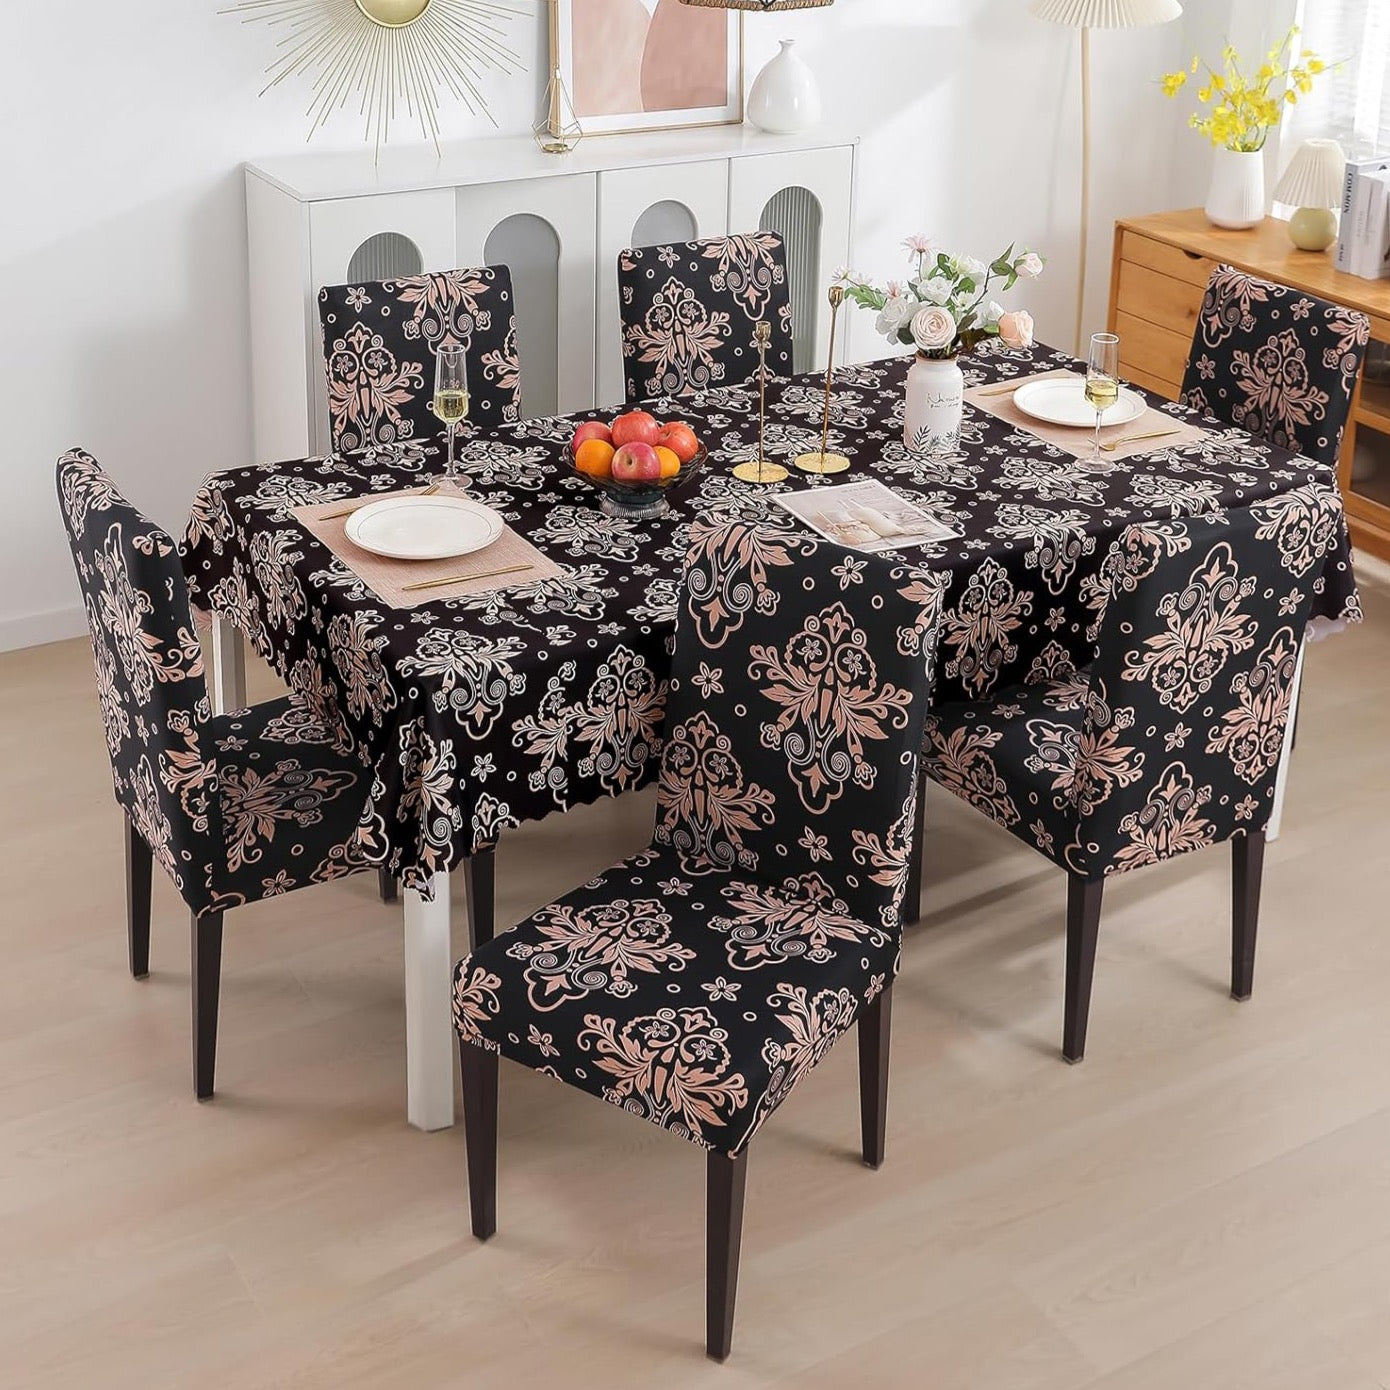 Premium Dining Table & Chair Cover Combo - Black Brocade